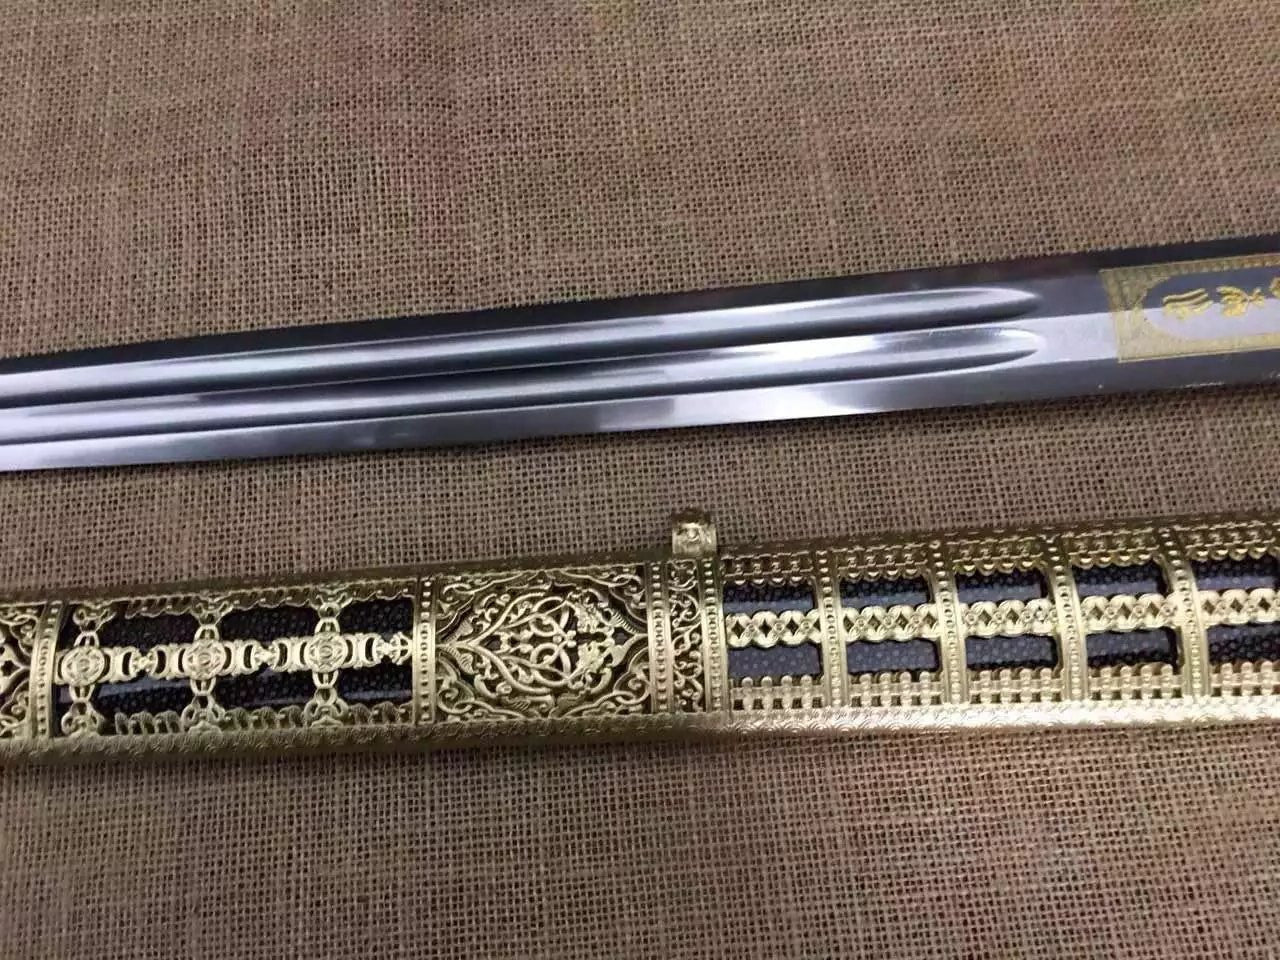 Yongle sword,Folded steel,Skin scabbard,Copper fitting,Length 38" - Chinese sword shop